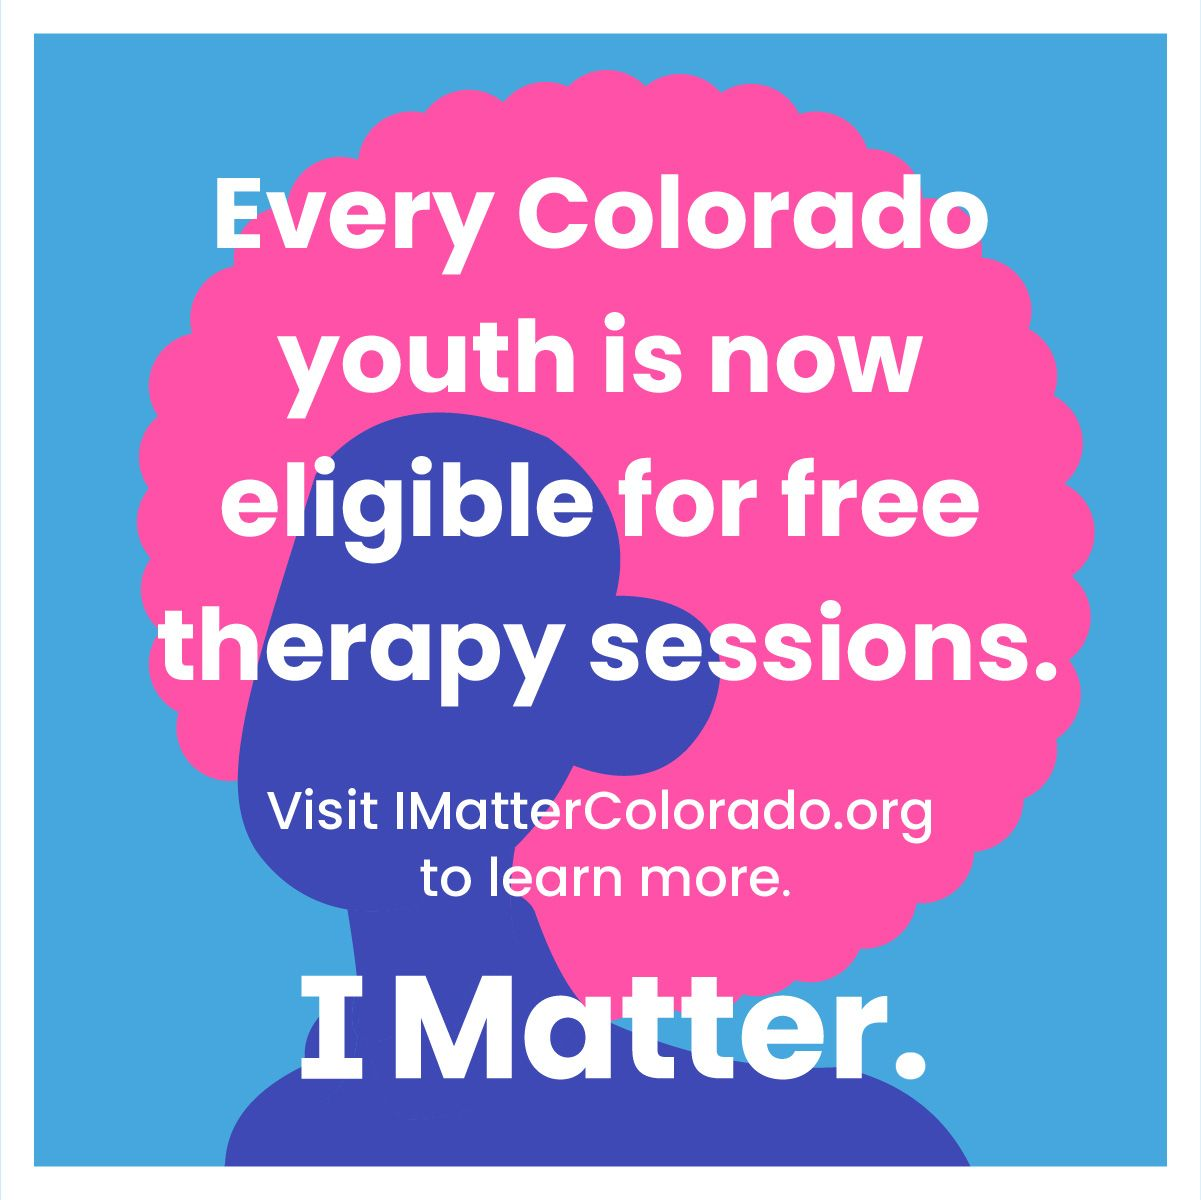 Every Colorado youth is now eligible for free therapy sessions